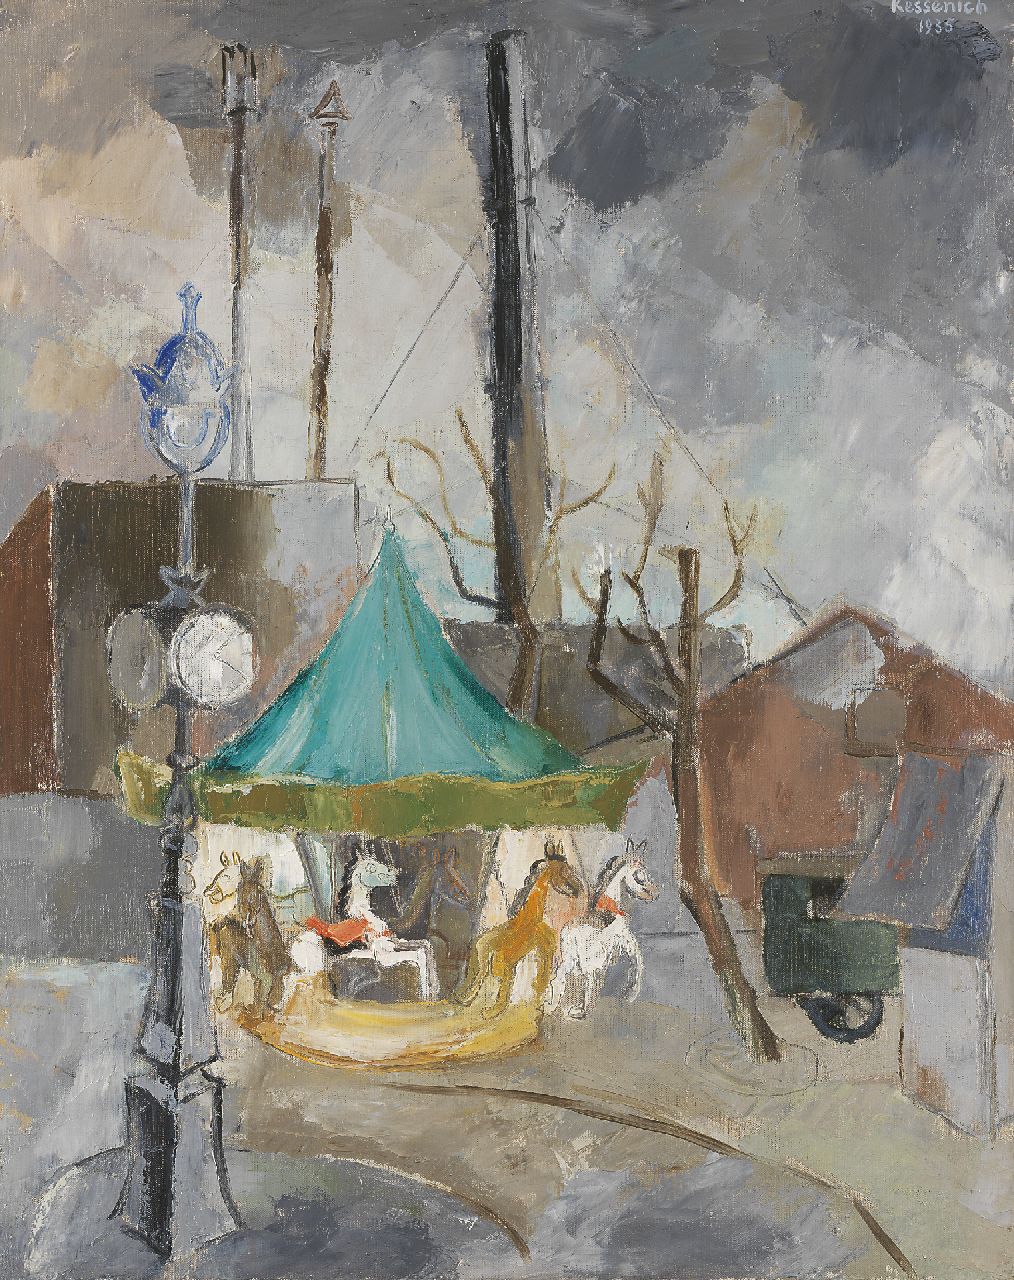 Judy Michiels van Kessenich | A merry-go-round in Paris, oil on canvas, 81.5 x 65.5 cm, signed u.r. and dated 1935